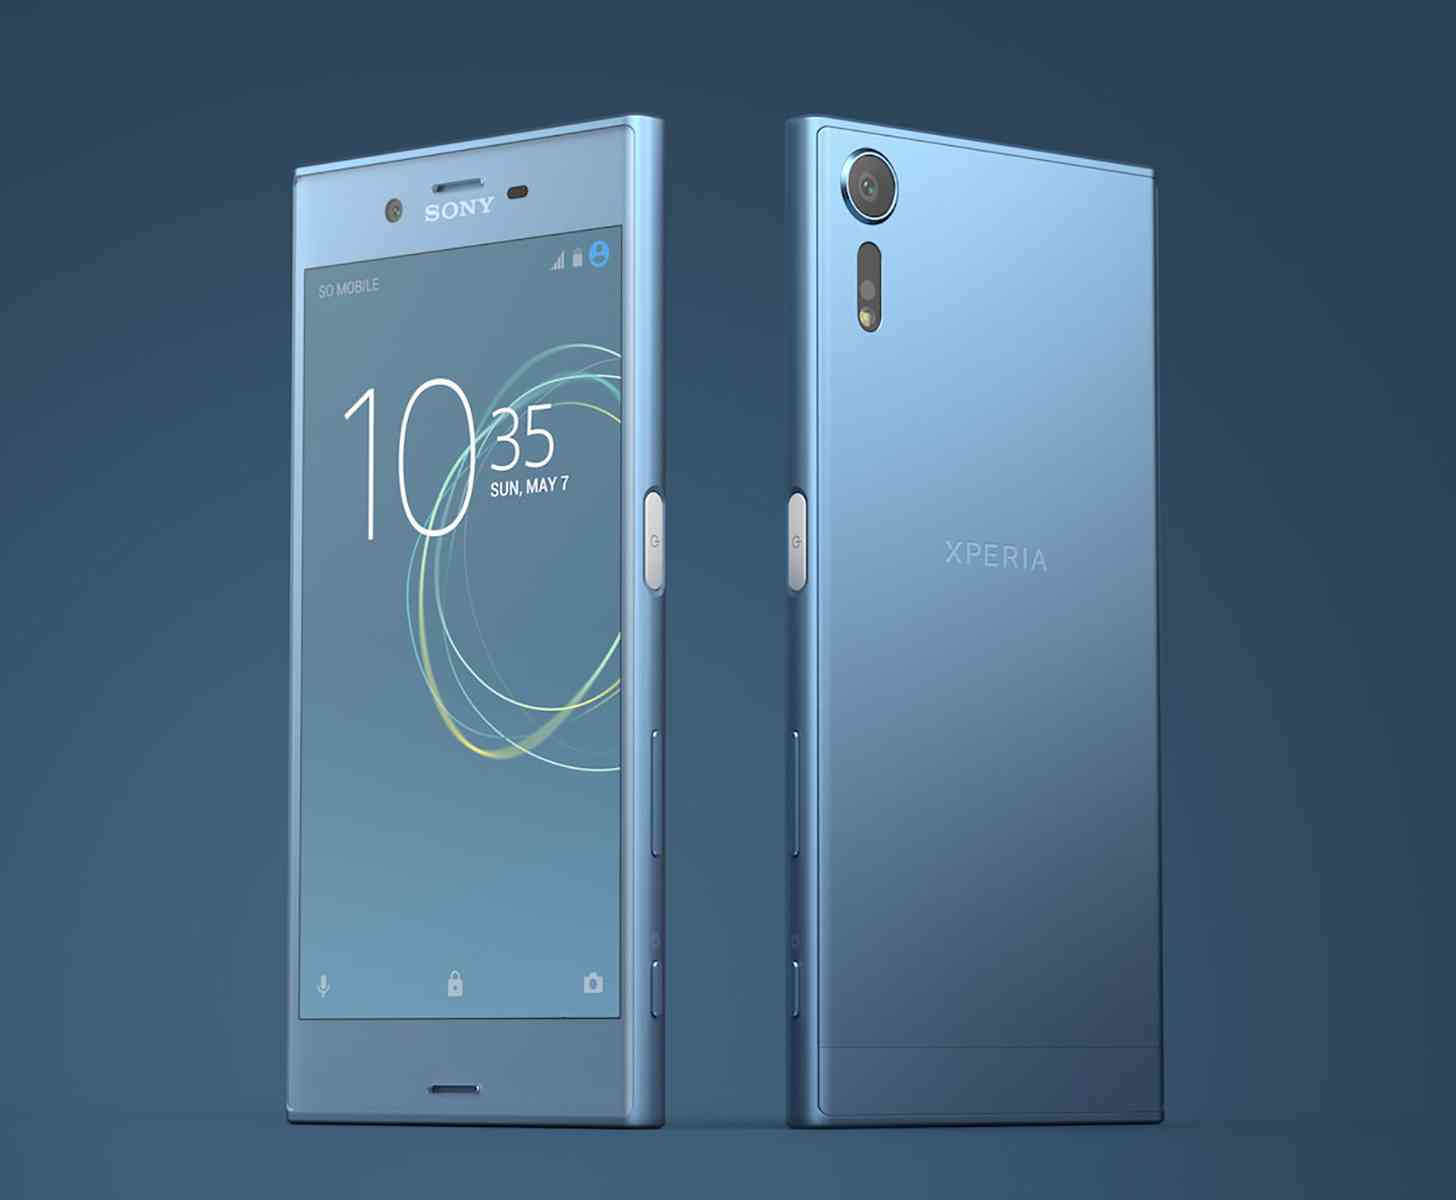 Sony Xperia XZs official MWC 2017